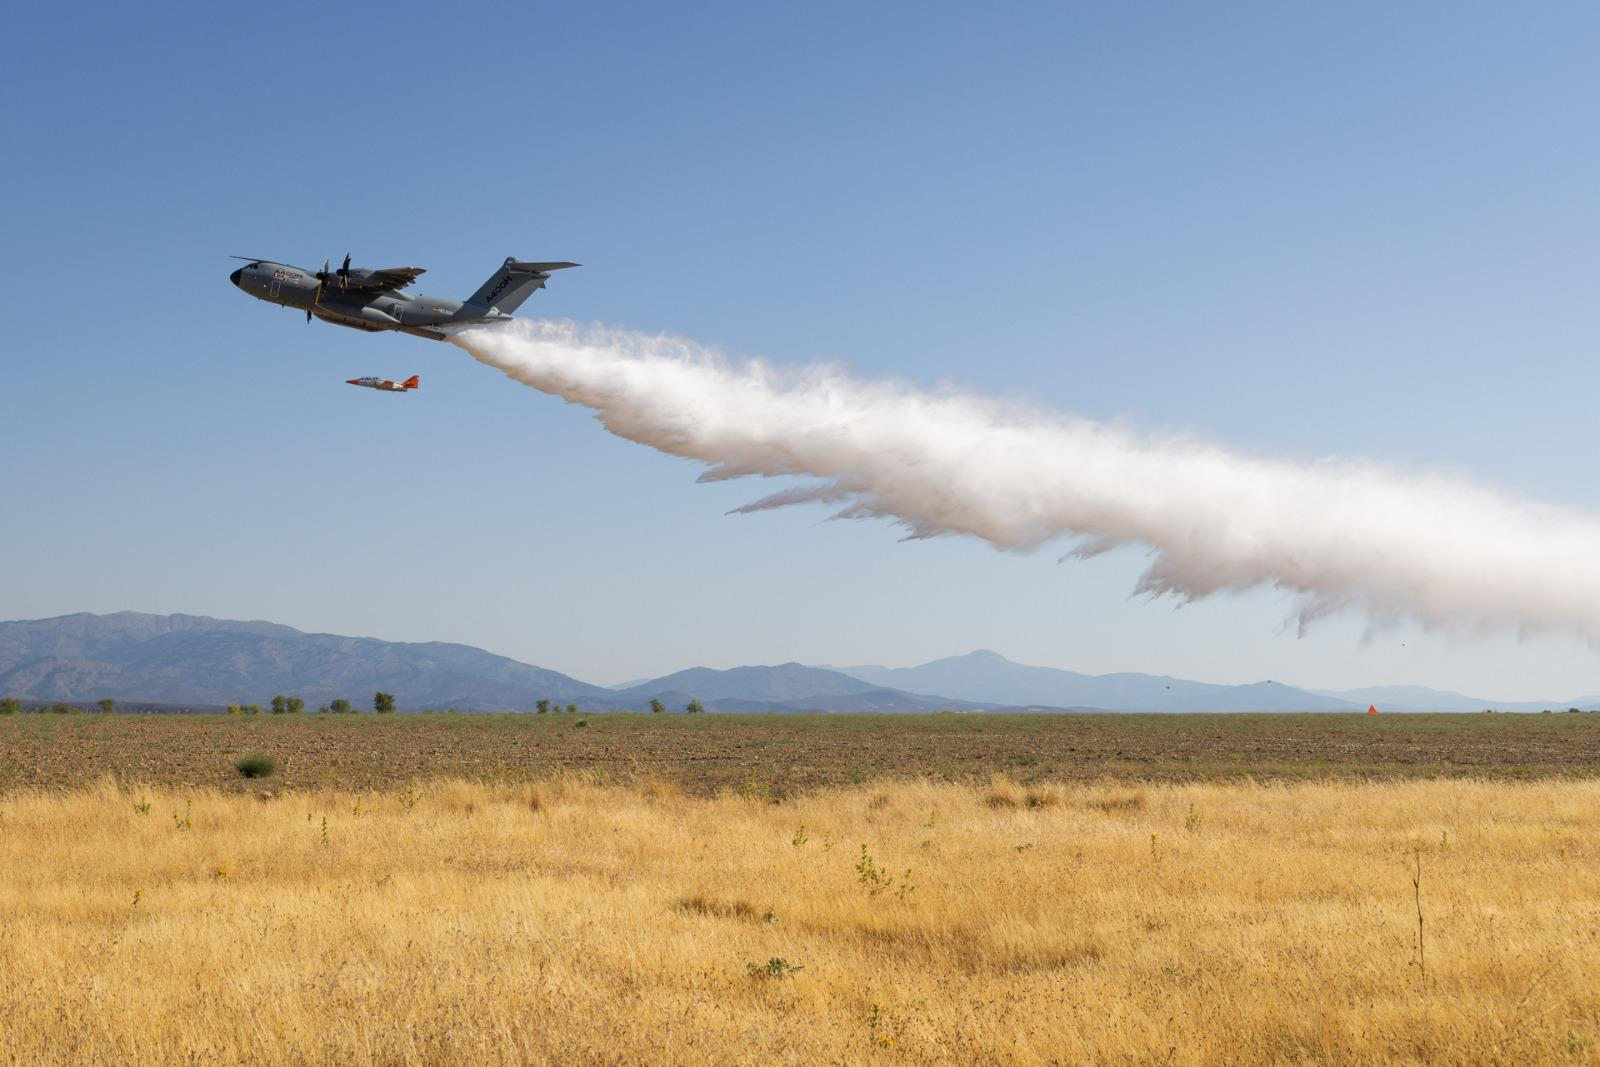 Airbus A400M in firefighting mode